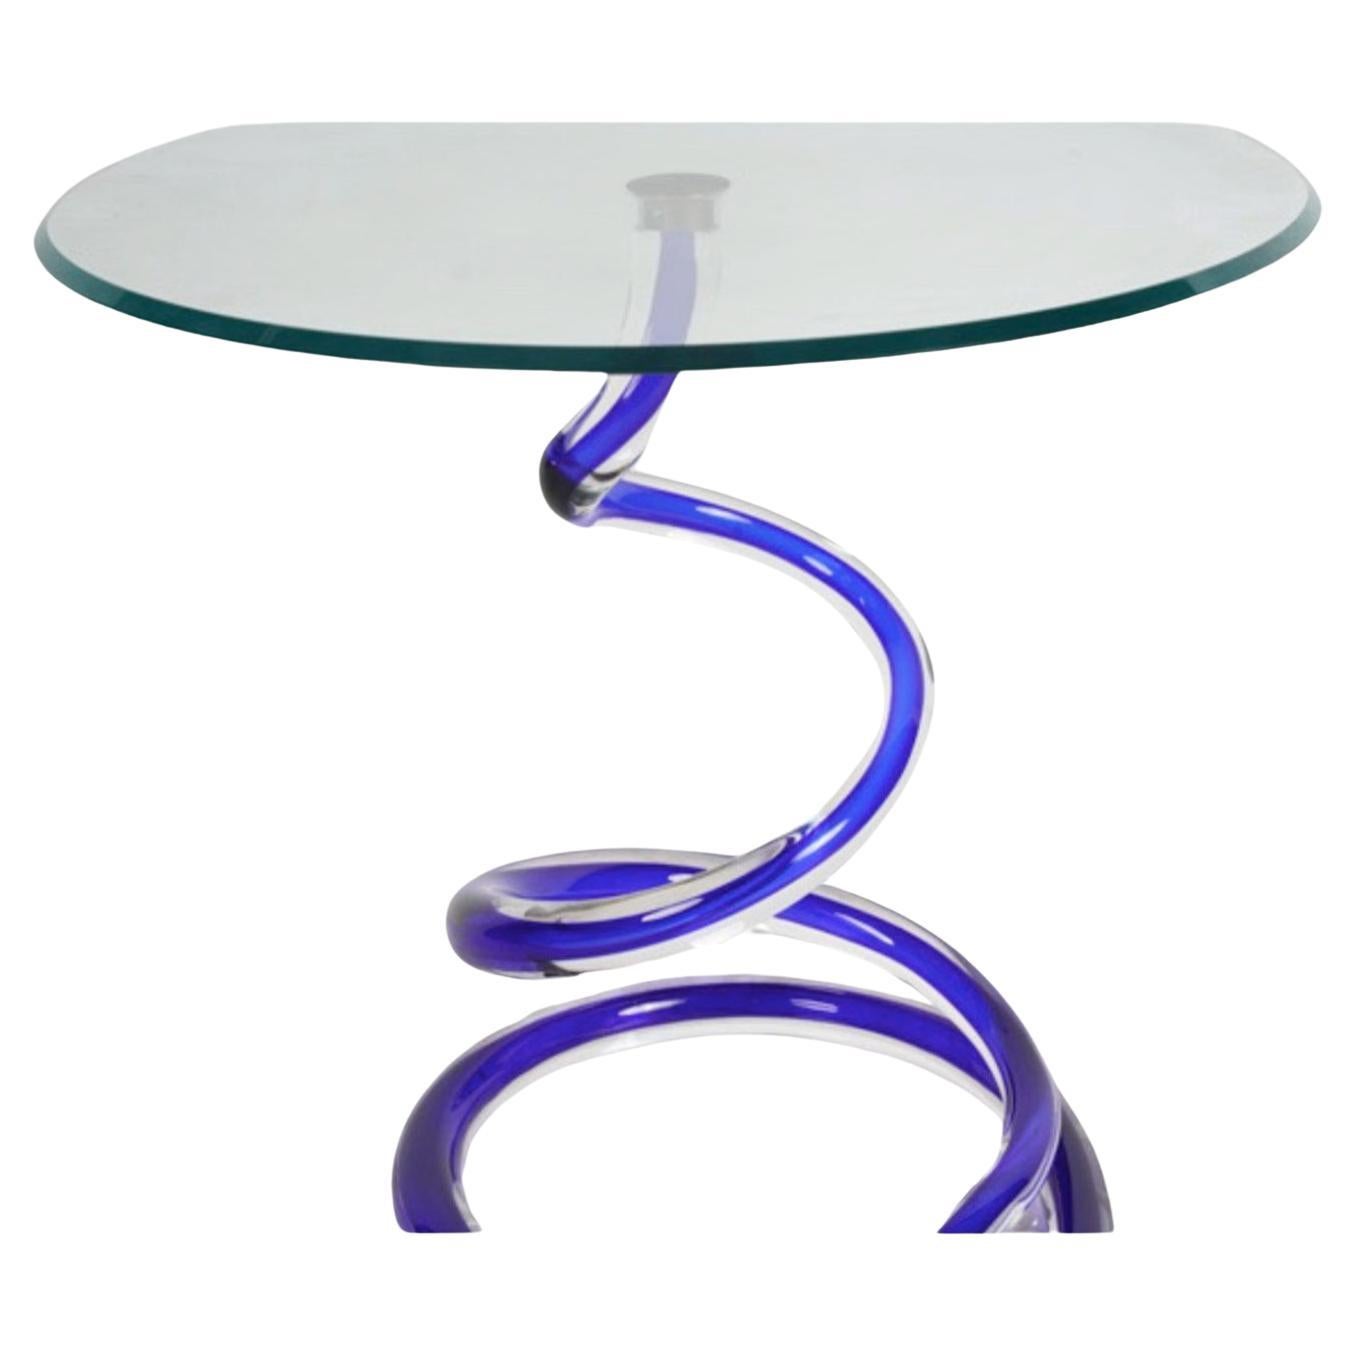 This is a beautifully blown glass drinks table by the renown Murano glass artist Alberto Dino. The table dates to the early 21st century and is in excellent condition. The swirled tubular cased glass pedestal is surmounted by a thick 24